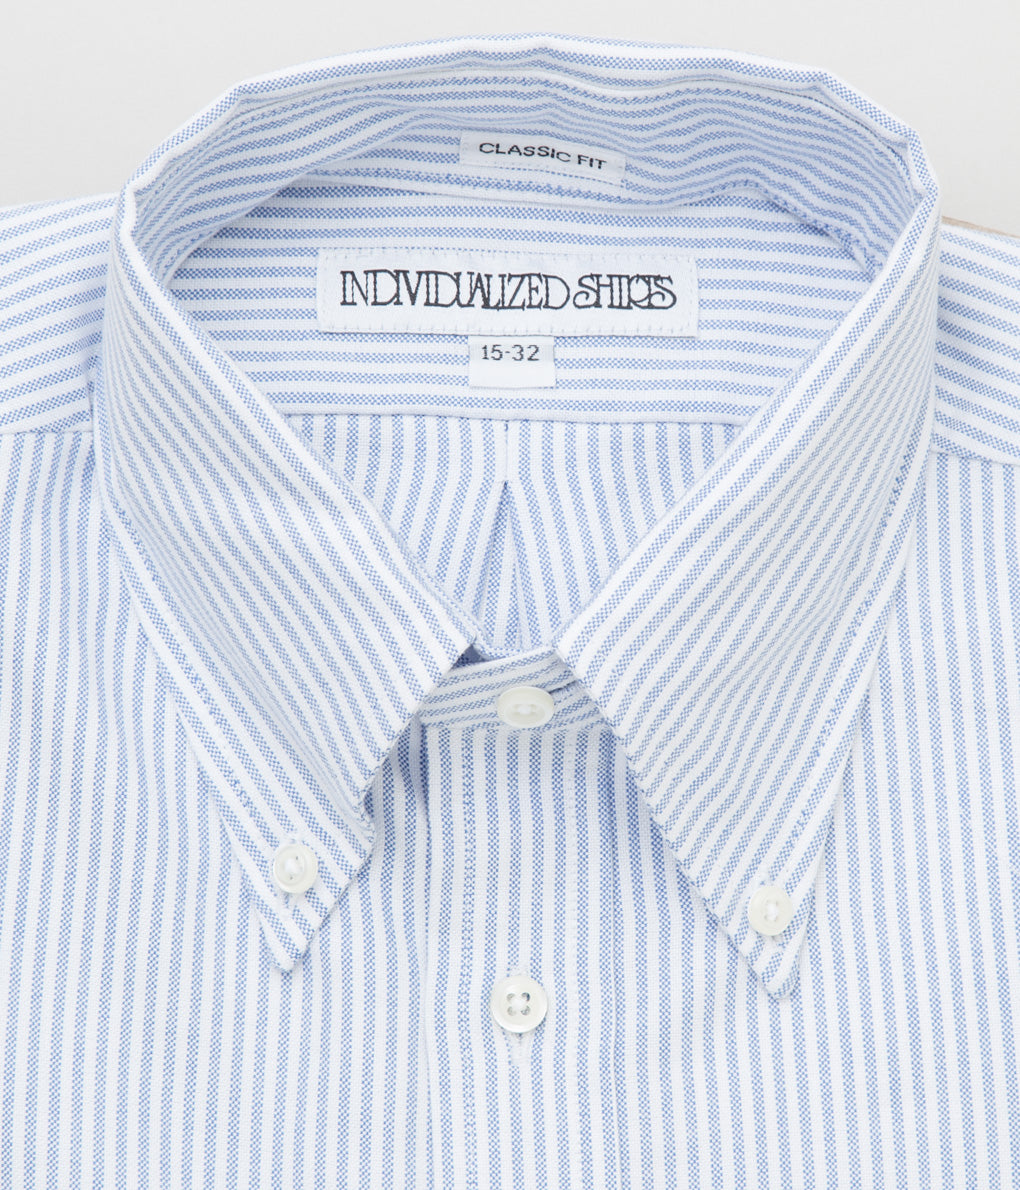 INDIVIDUALIZED SHIRTS "CANDY STRIPE (CLASSIC FIT BUTTON DOWN SHIRT)" (LIGHT BLUE)